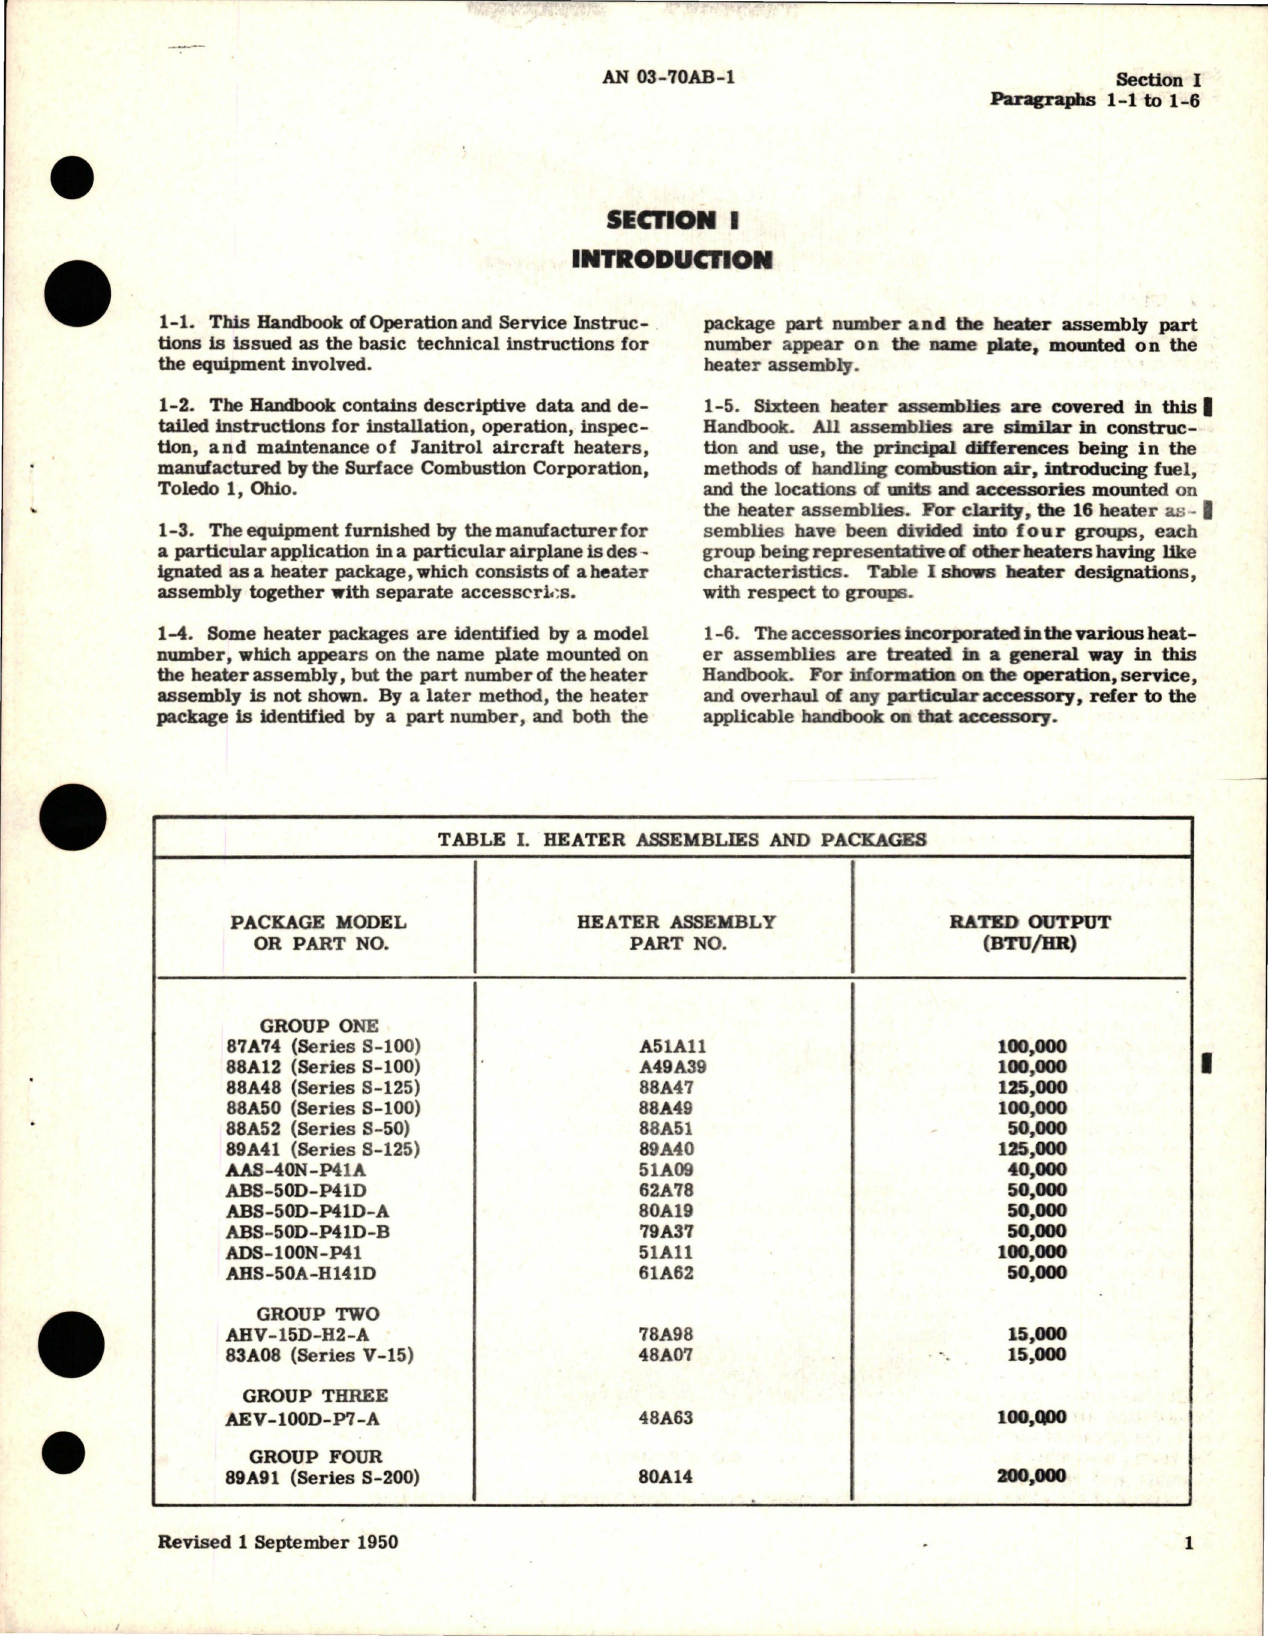 Sample page 5 from AirCorps Library document: Operation and Service Instructions for Aircraft Heaters 